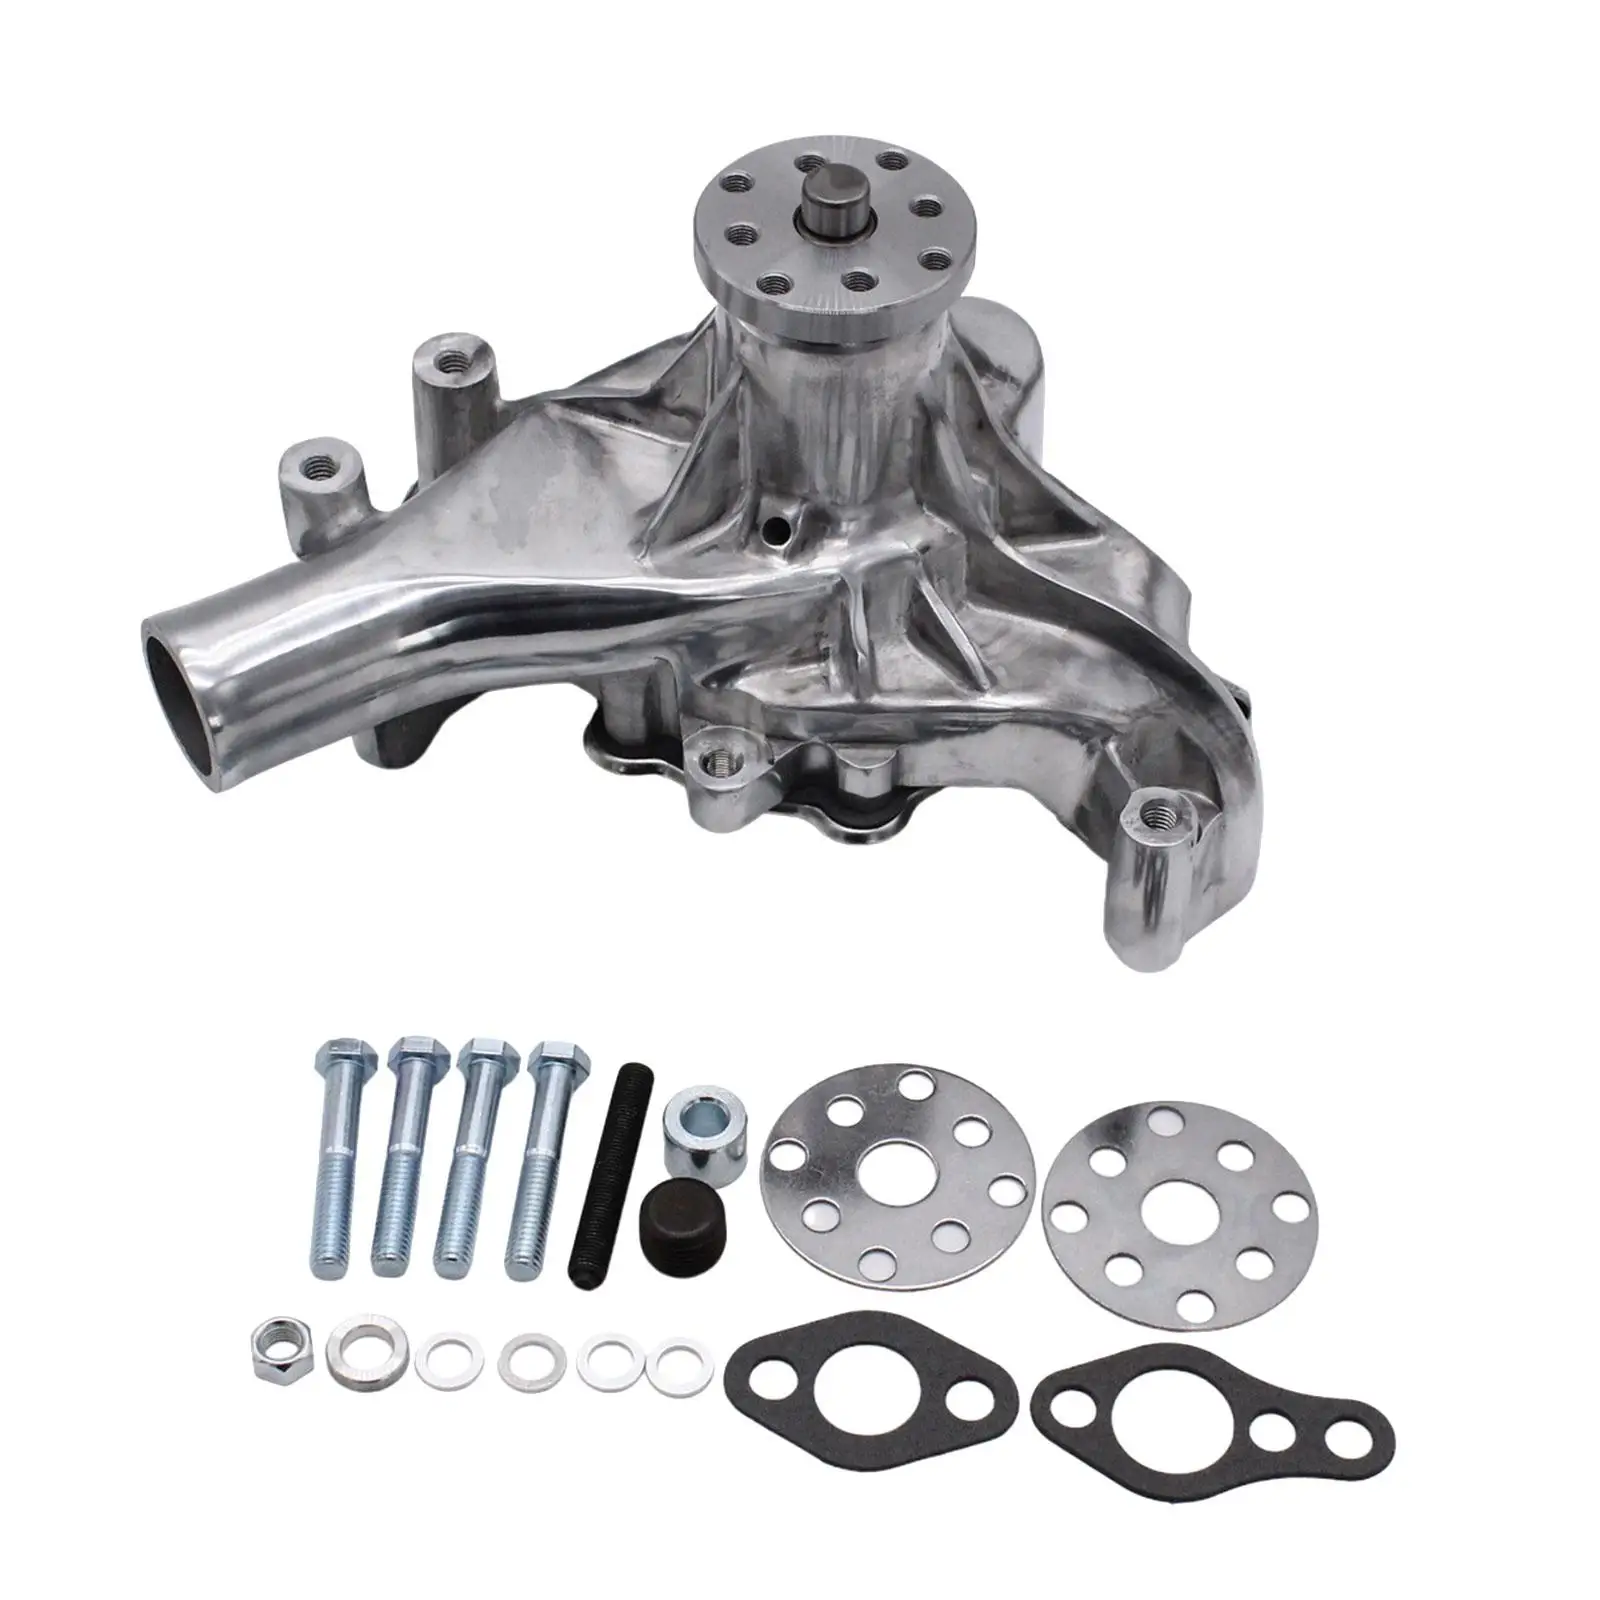 Water Pump Long Replace Parts Professional Automotive for Chevy Sbc